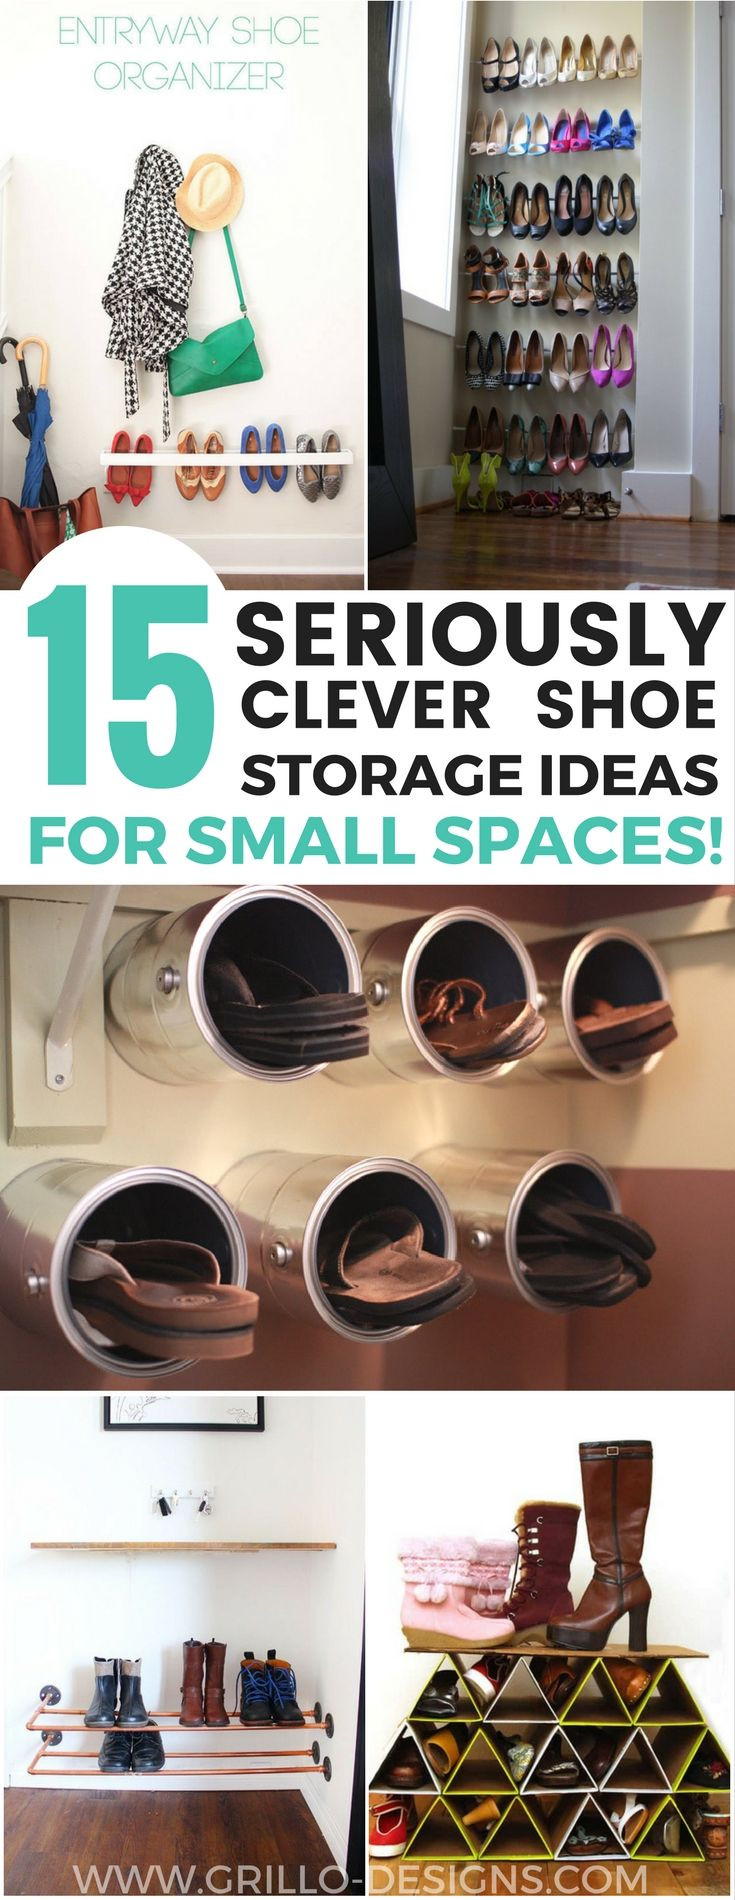 DIY Shoe Organizer For Small Closet
 9485 best Remodelaholic Contributors images on Pinterest